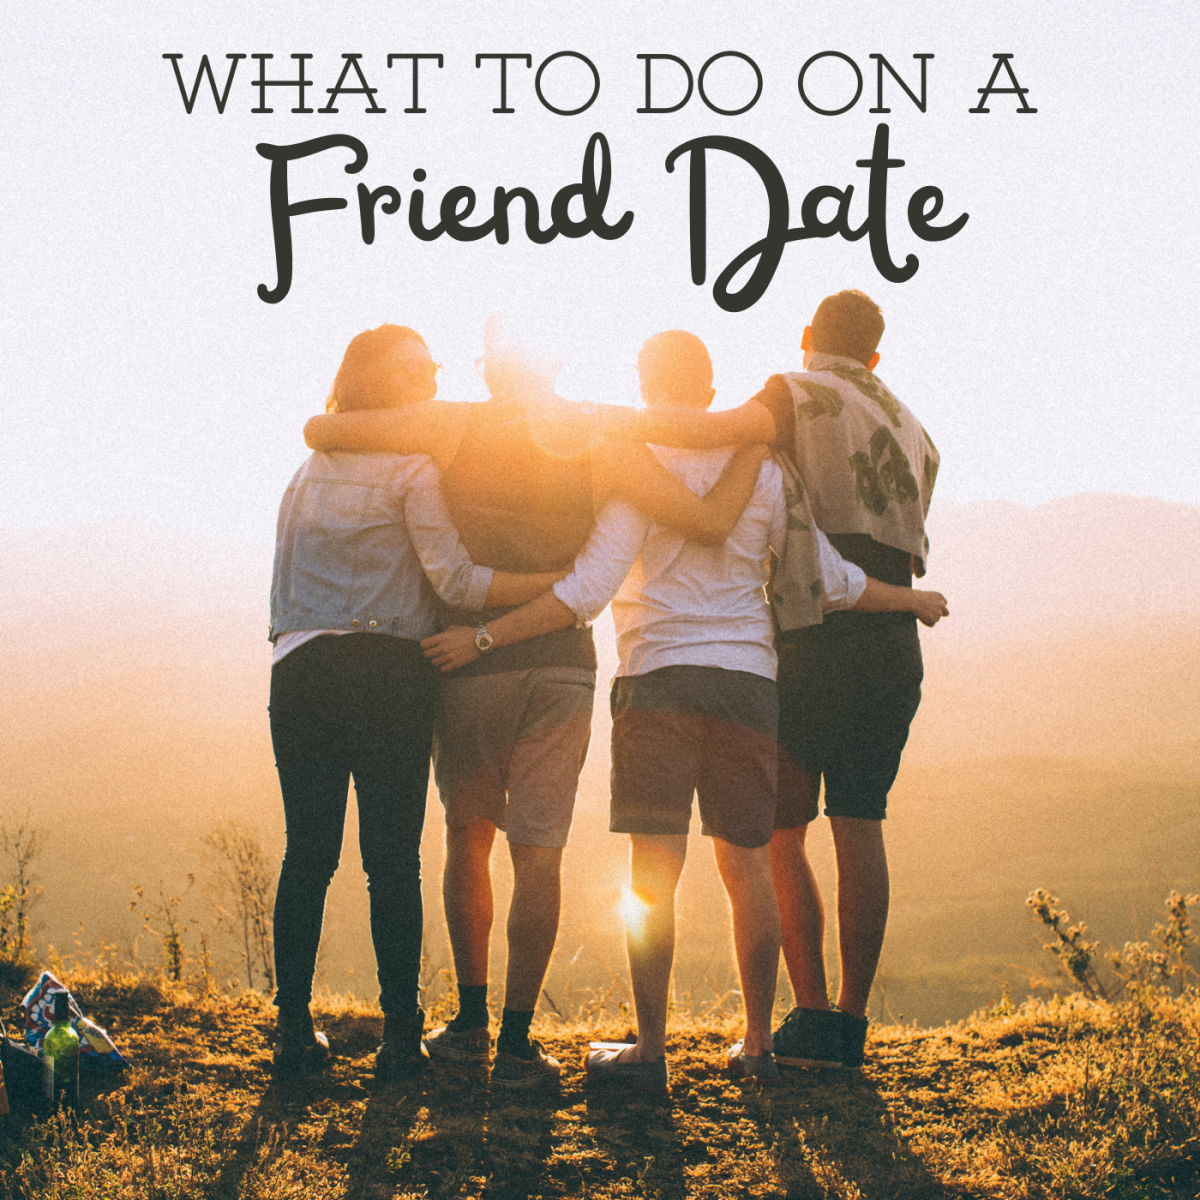 Friend Dates: Fun Things to Do With Friends.